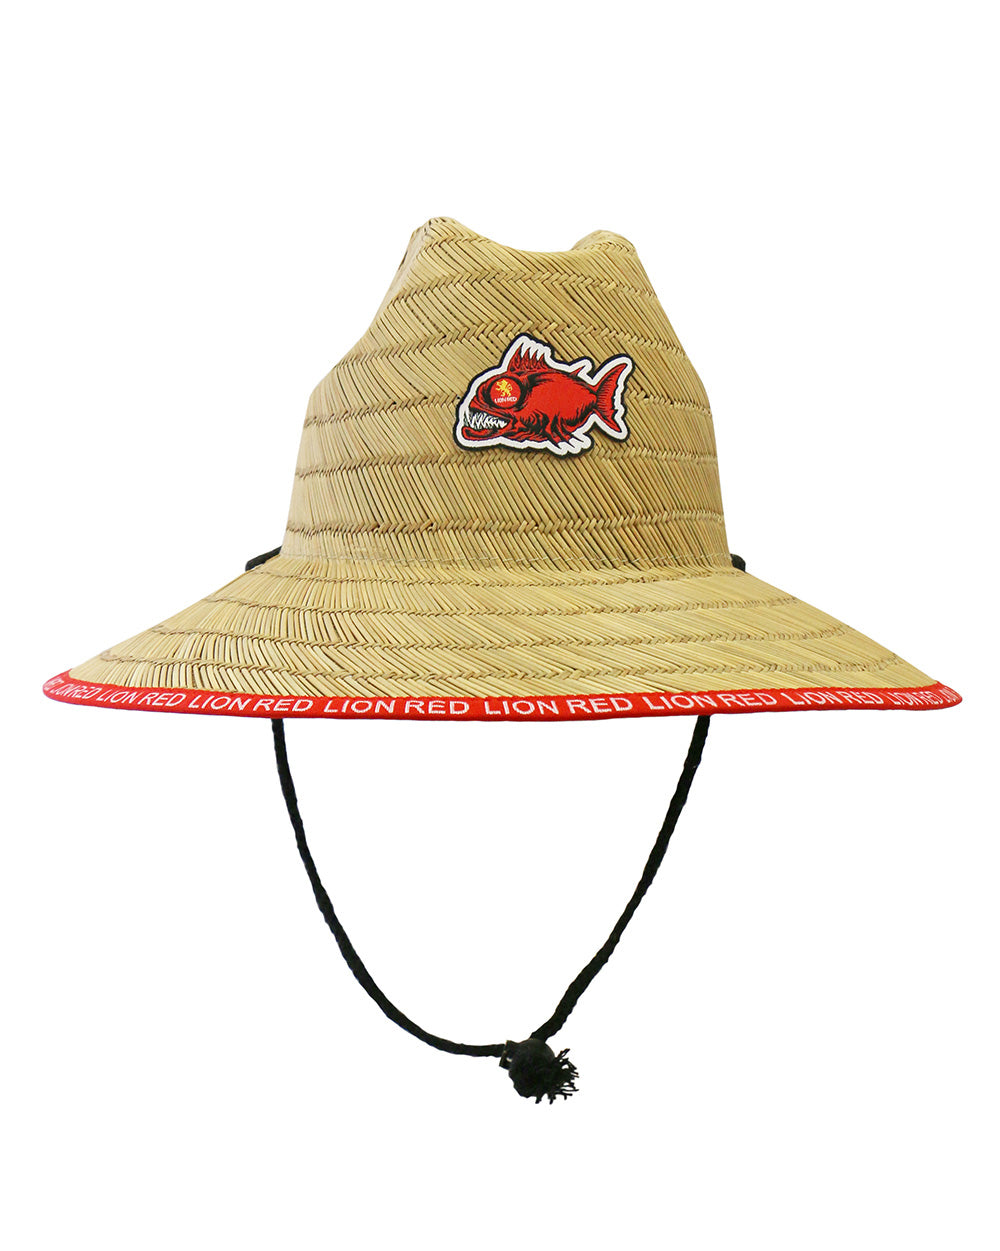 Lion Red Straw Hat -  Beer Gear Apparel & Merchandise - Speights - Lion Red - VB - Tokyo Dy merch